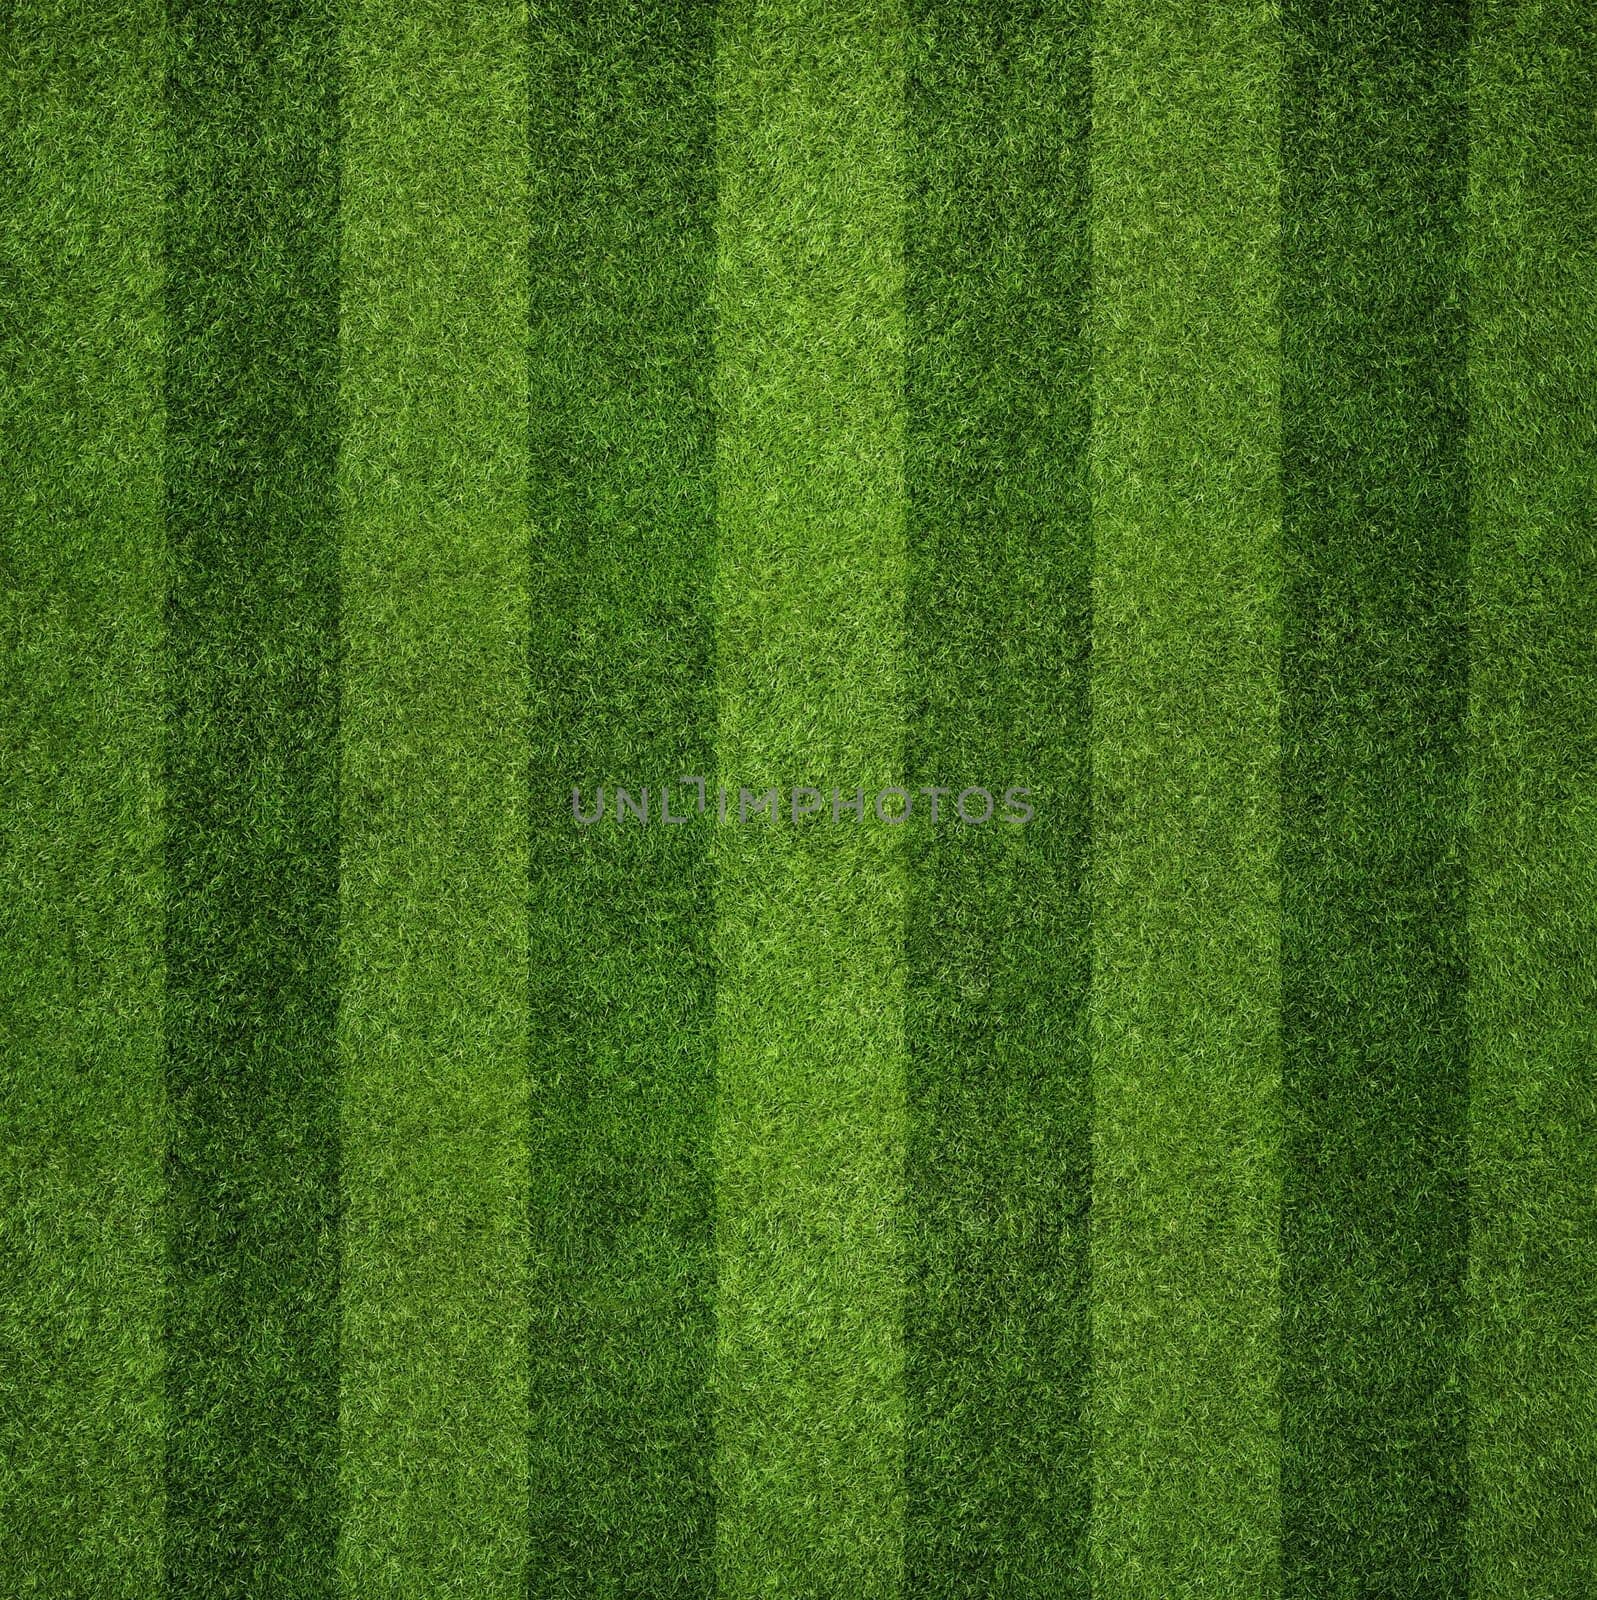 Short-cropped green grass with a large stripe top view by Mastak80